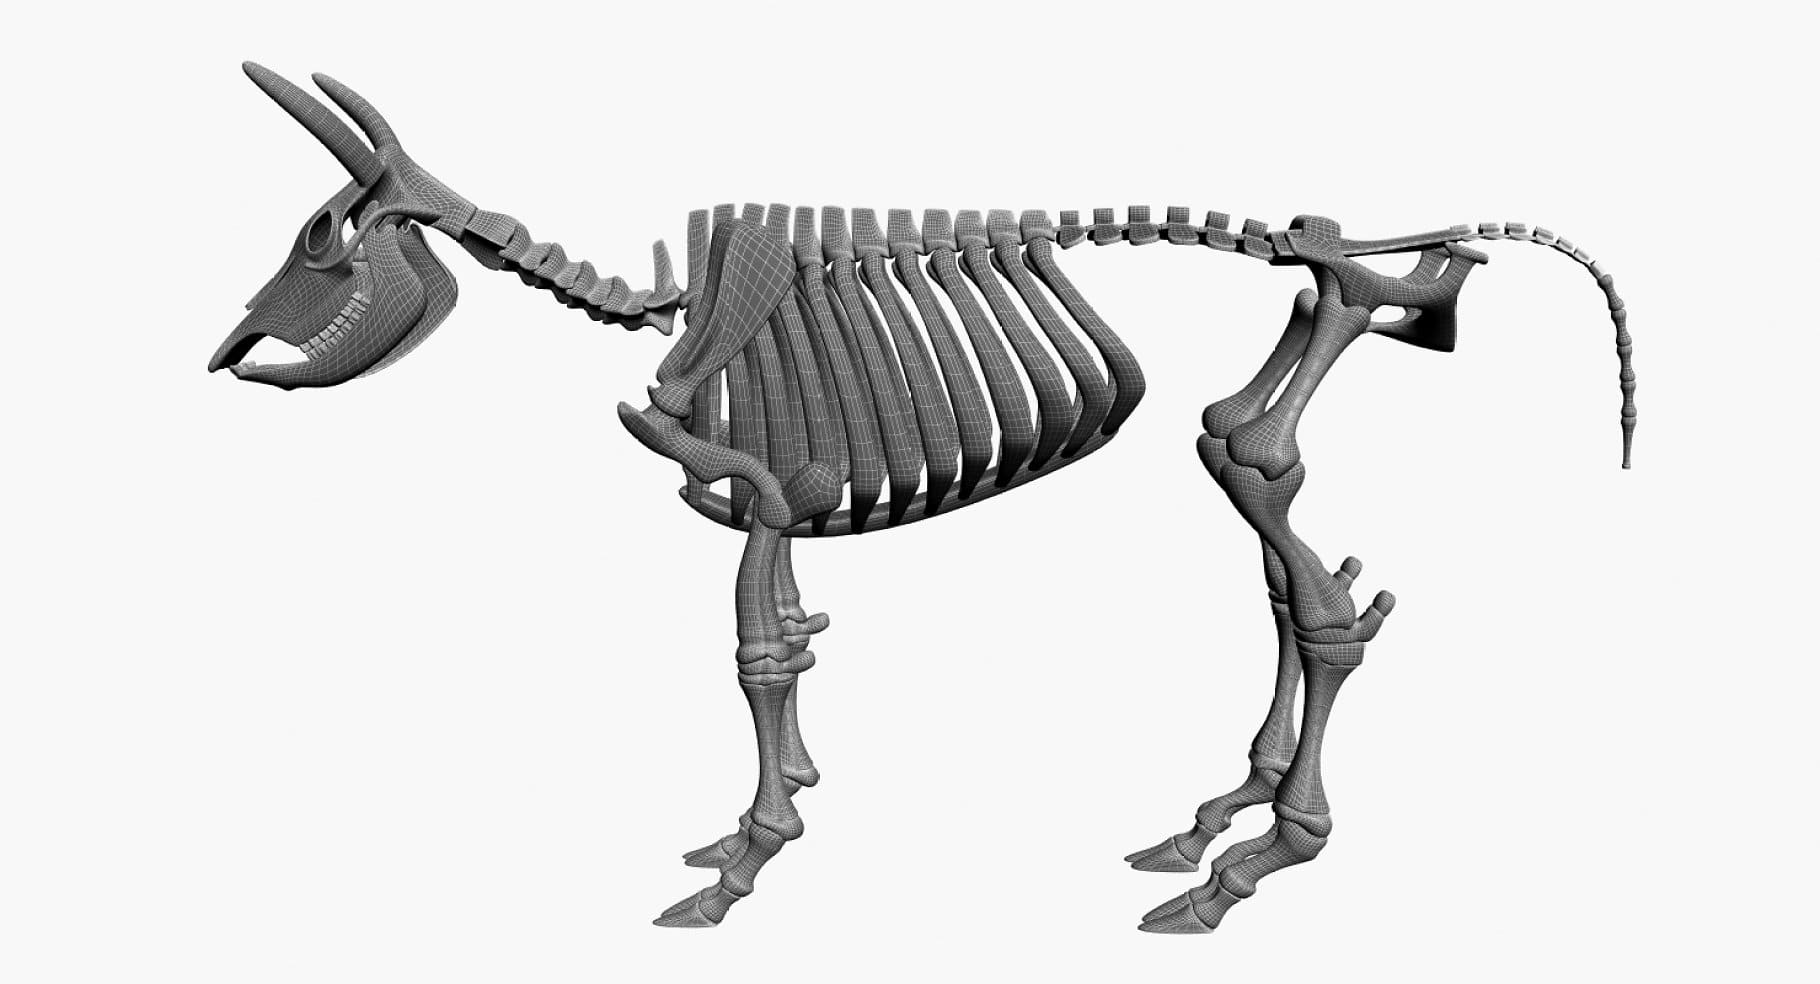 Image of a 3D model of a cattle skeleton.